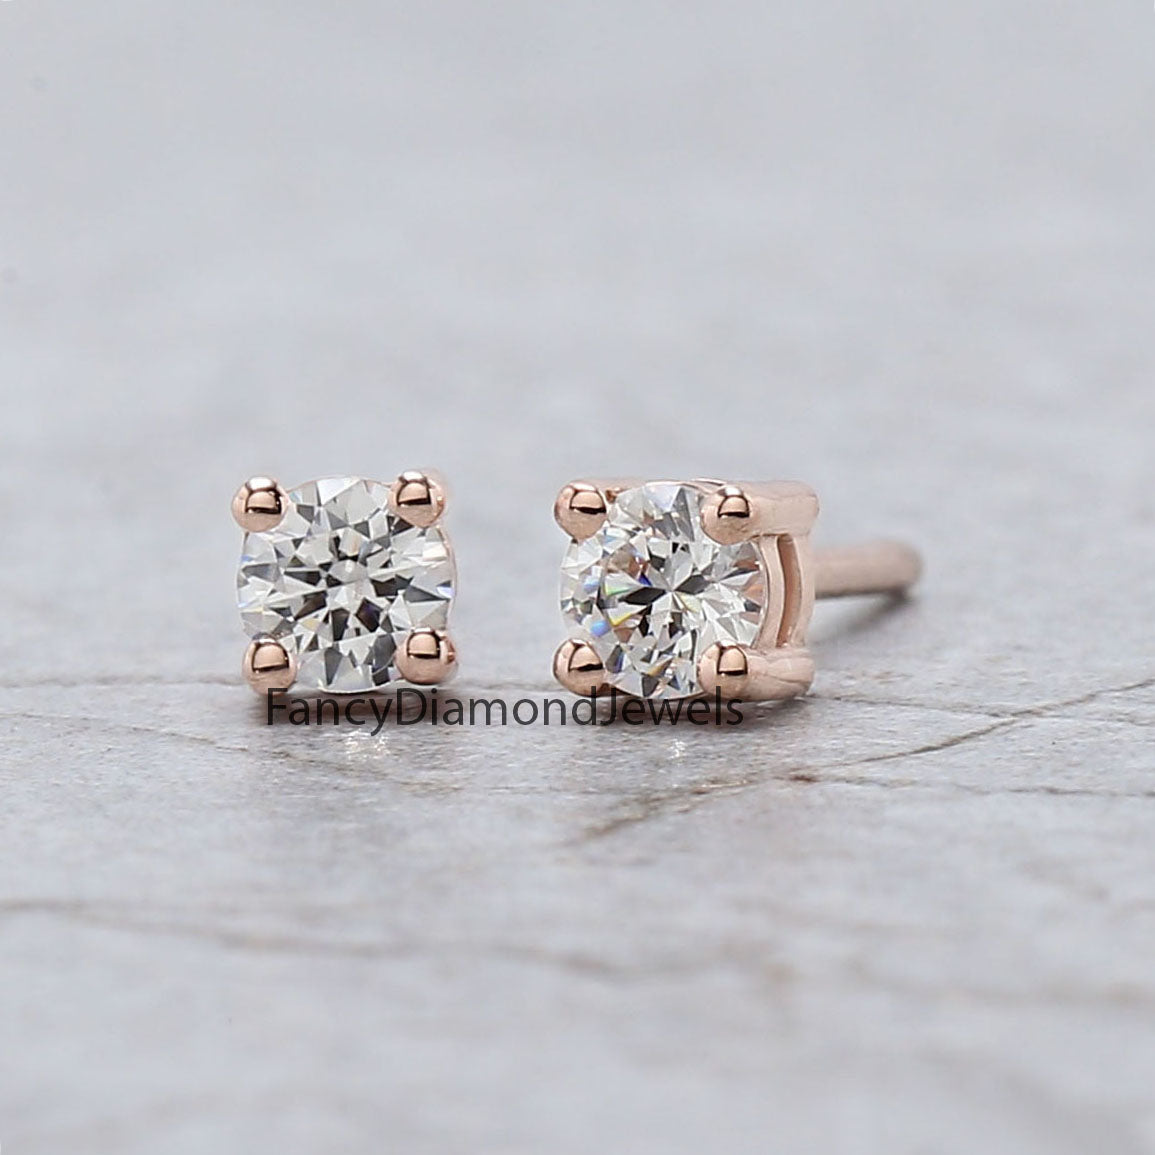 Round White Color Diamond Earring Engagement Wedding Gift Earring 14K Solid Rose White Yellow Gold Earring 0.34 CT KD999